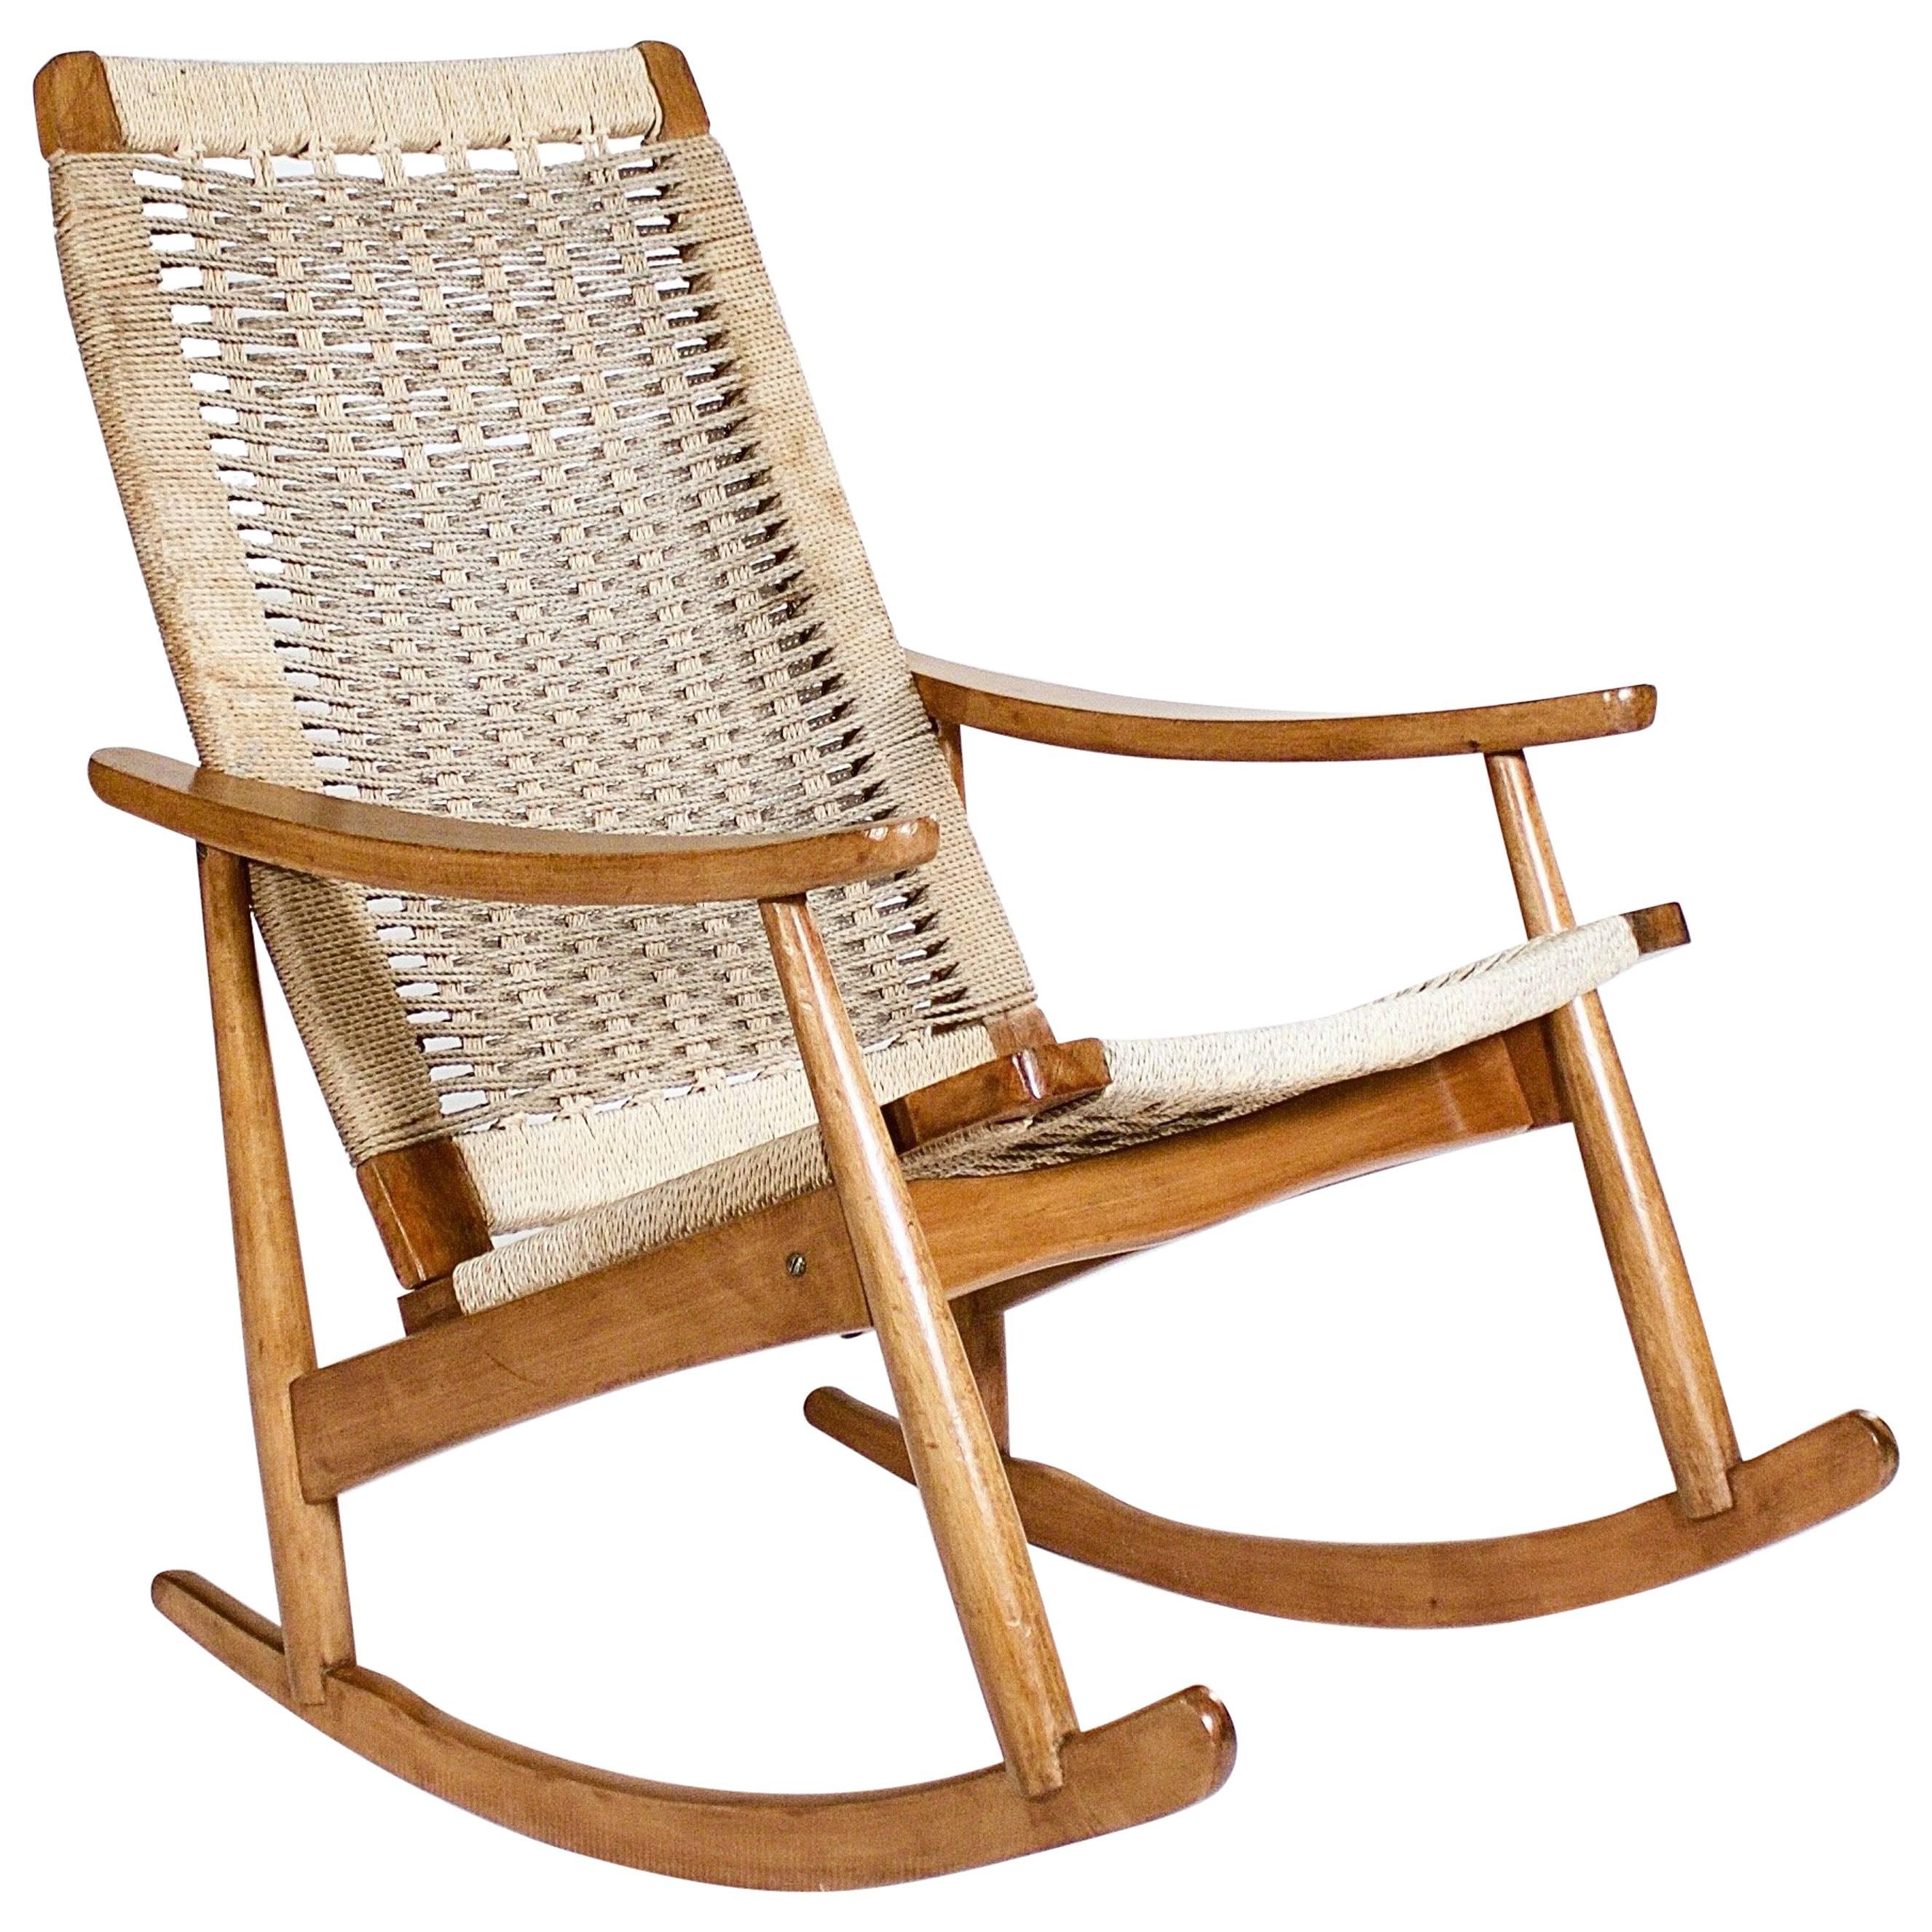 Teak Rocking Chair with Cord Strung Seat and Back For Sale